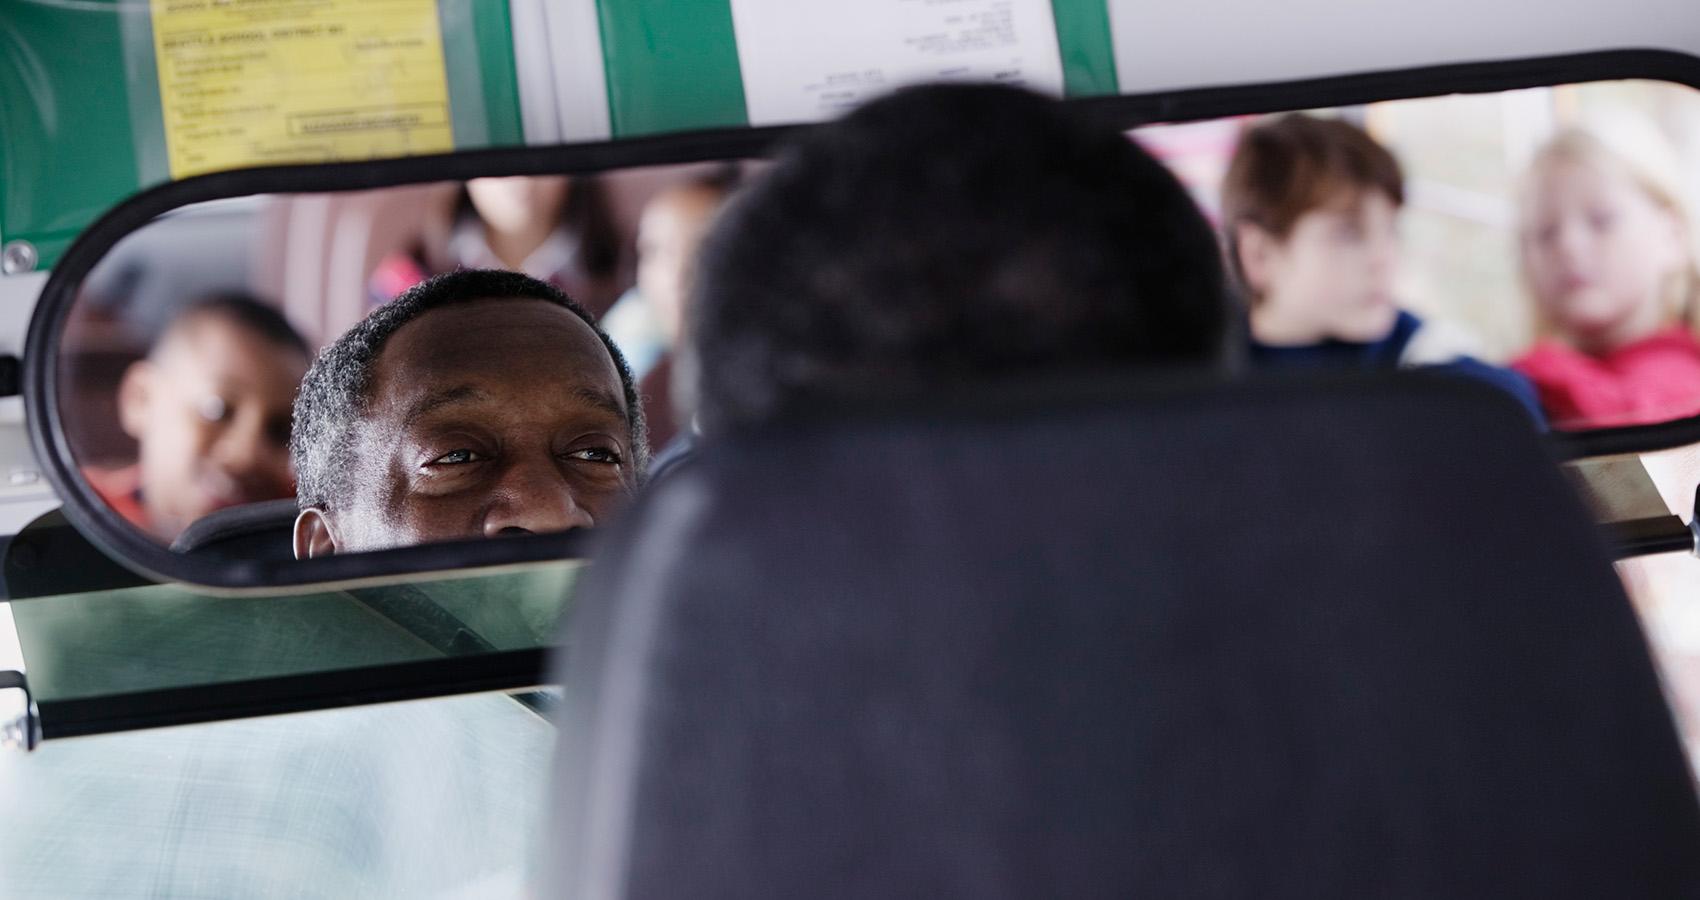 Bus driver looking at kids in rear-view mirror